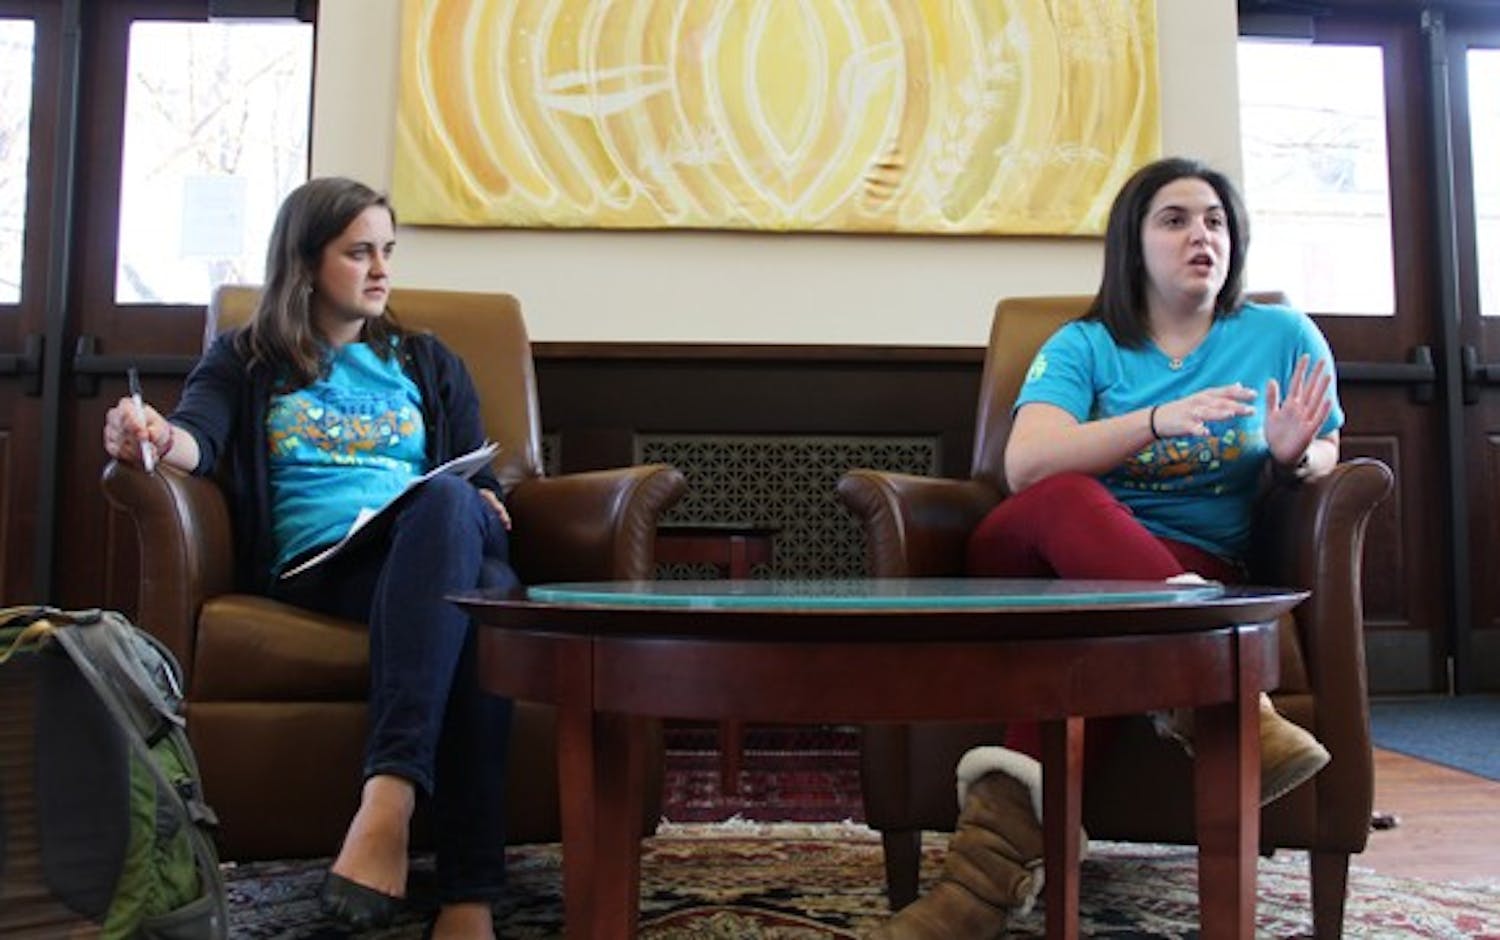 Natalie Borrego and Cora Went discuss their 2013-2014 Campus Y co-president platforms to members of the Campus Y.